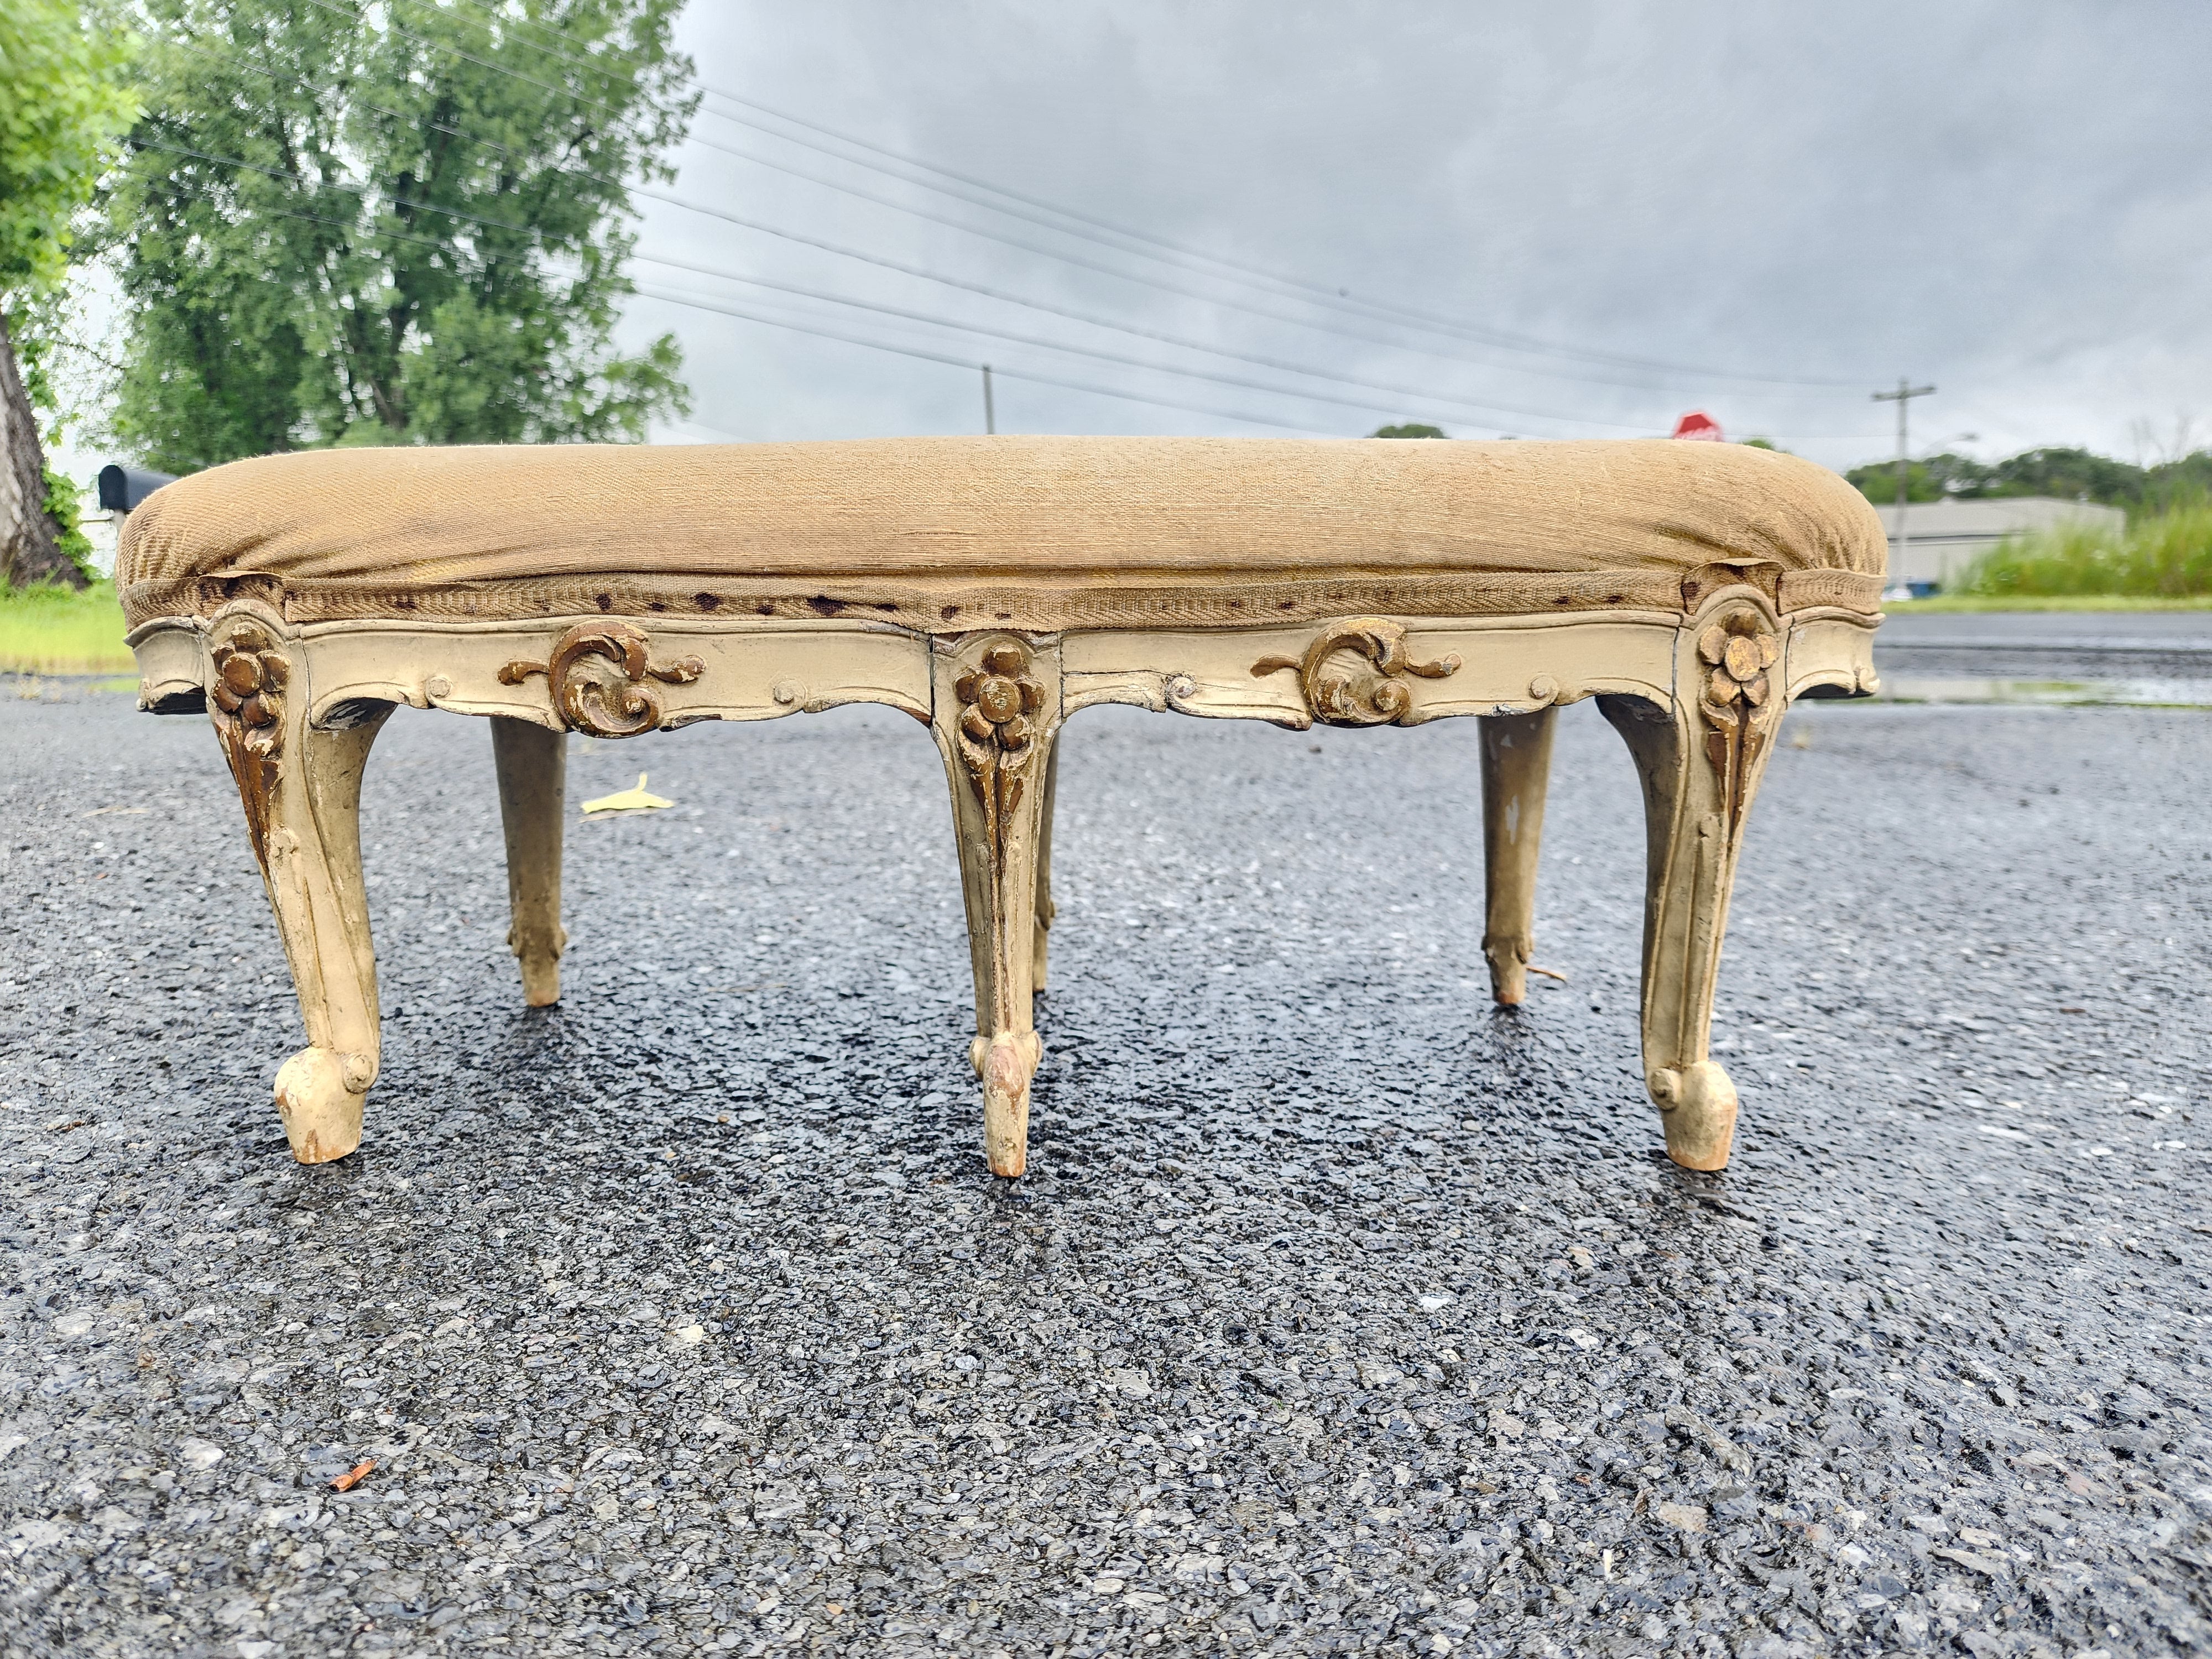 This is an extremely handsome French Rococo Revival footstool. Unusual shape and size. Mid-19th Century likely France retaining the original Gray undercoat with cream exterior and gold gilding. Also retaining the original upholstery and surface.
We